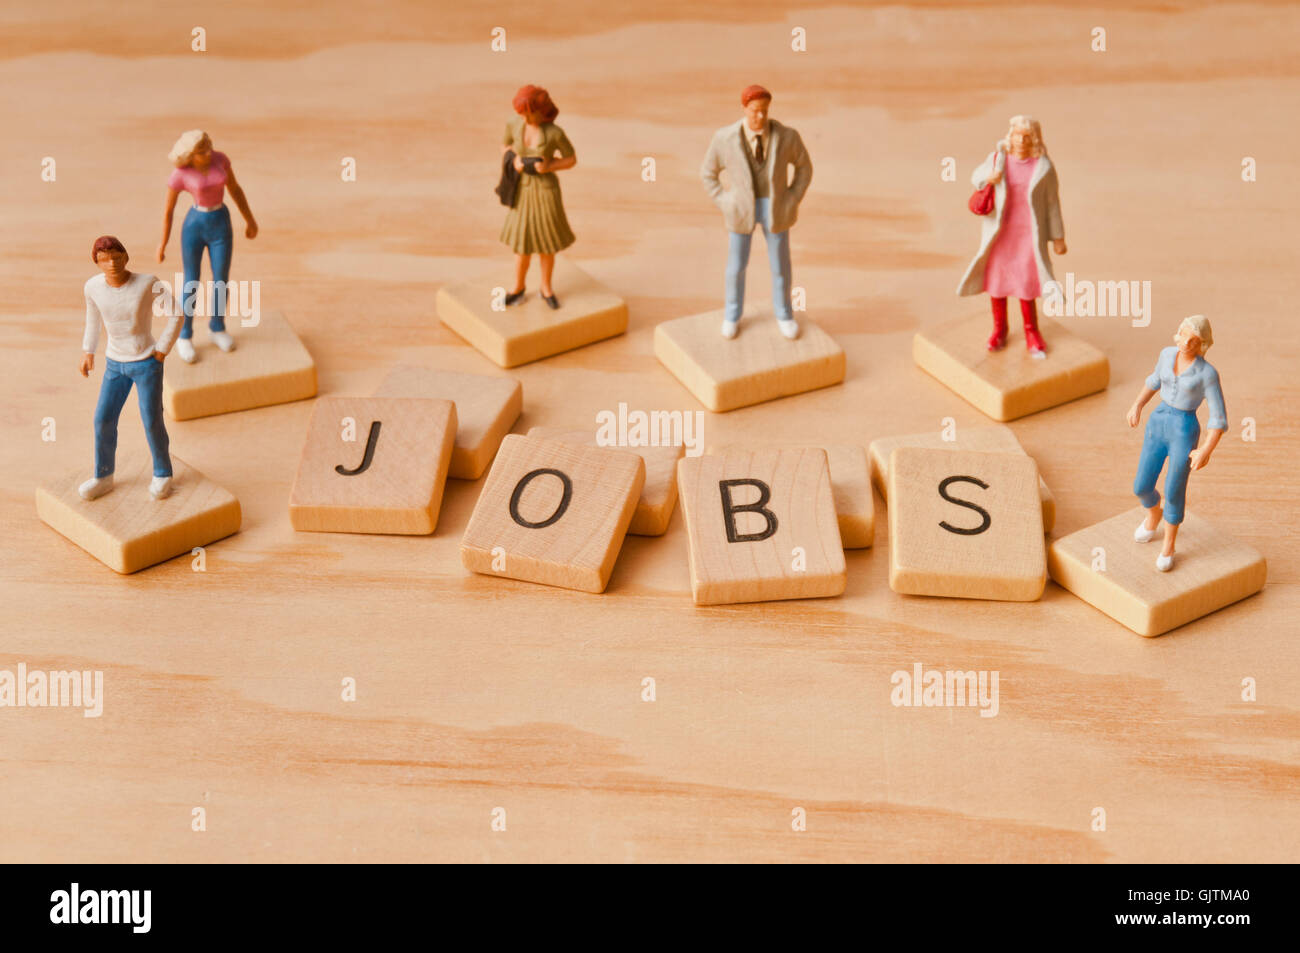 job search and unemployment concept Stock Photo